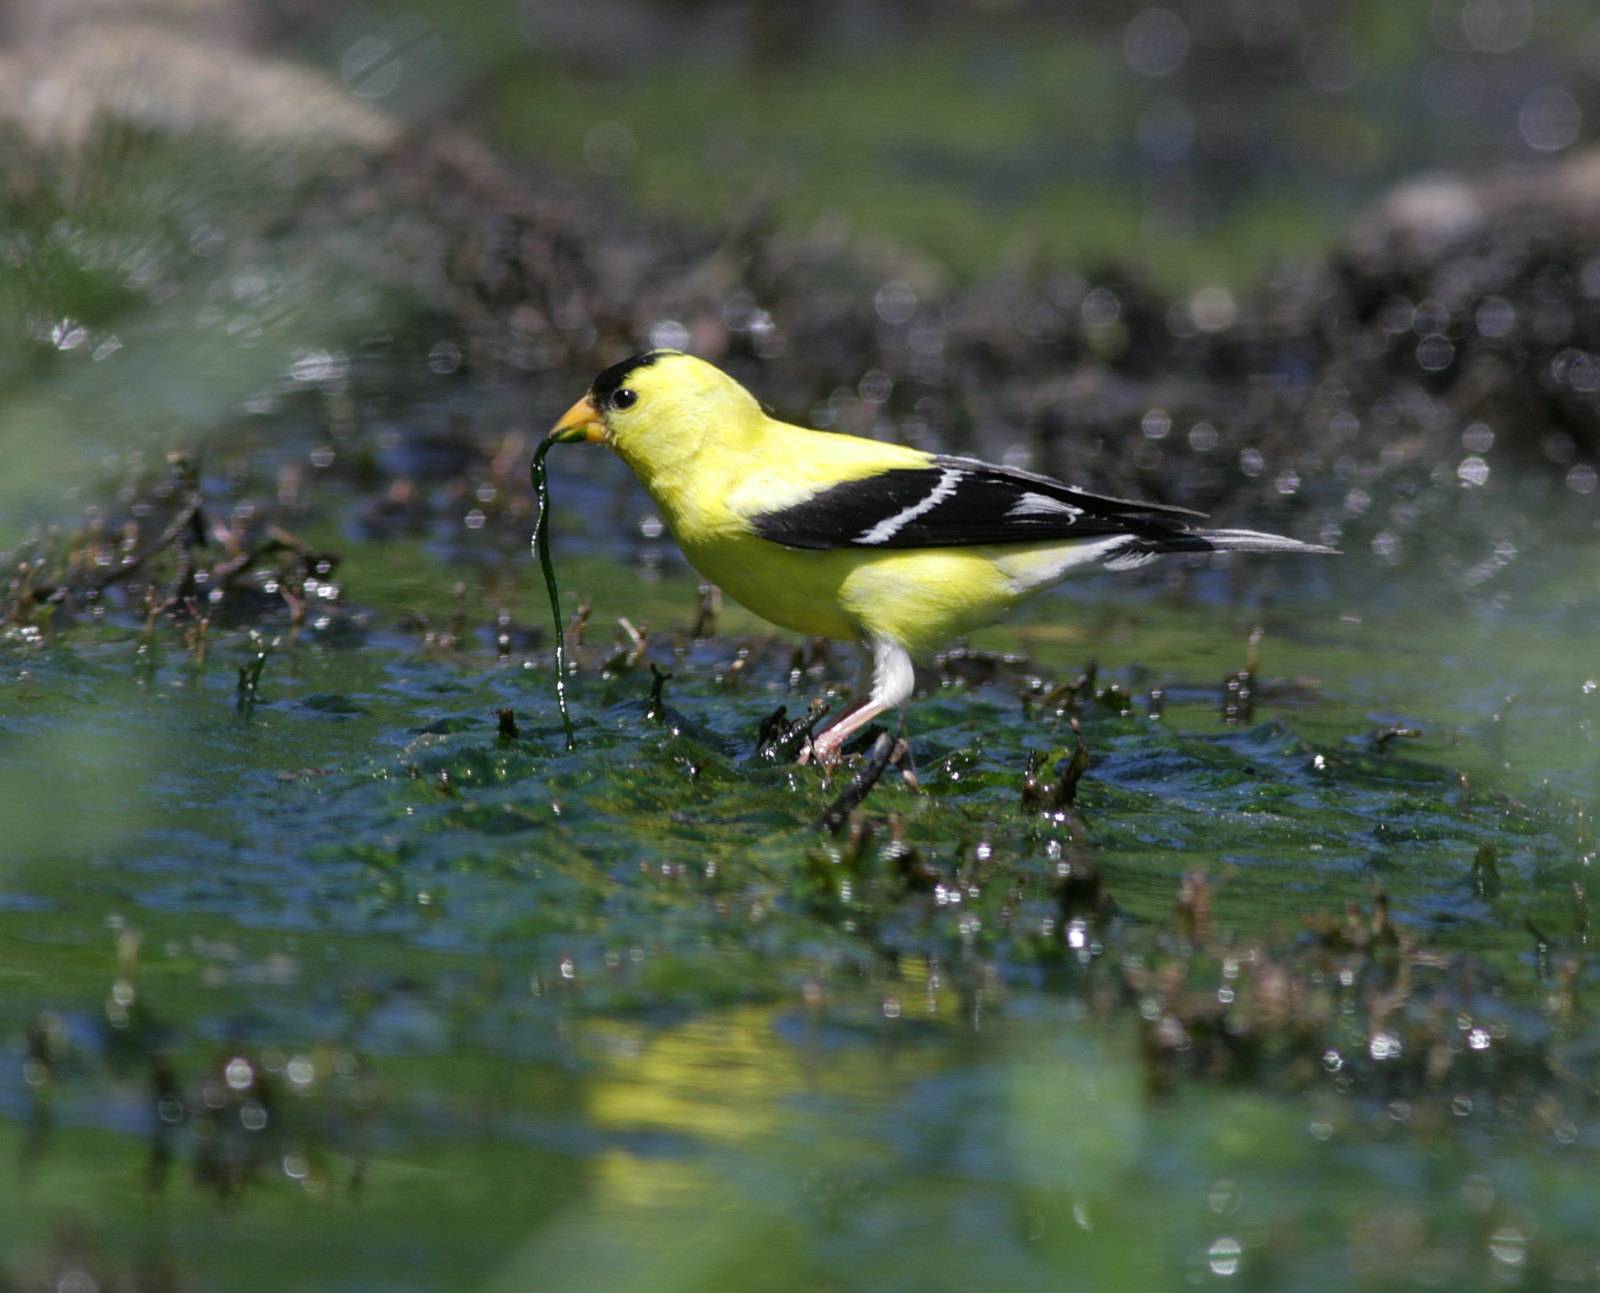 An American goldfinch in the Eno River.